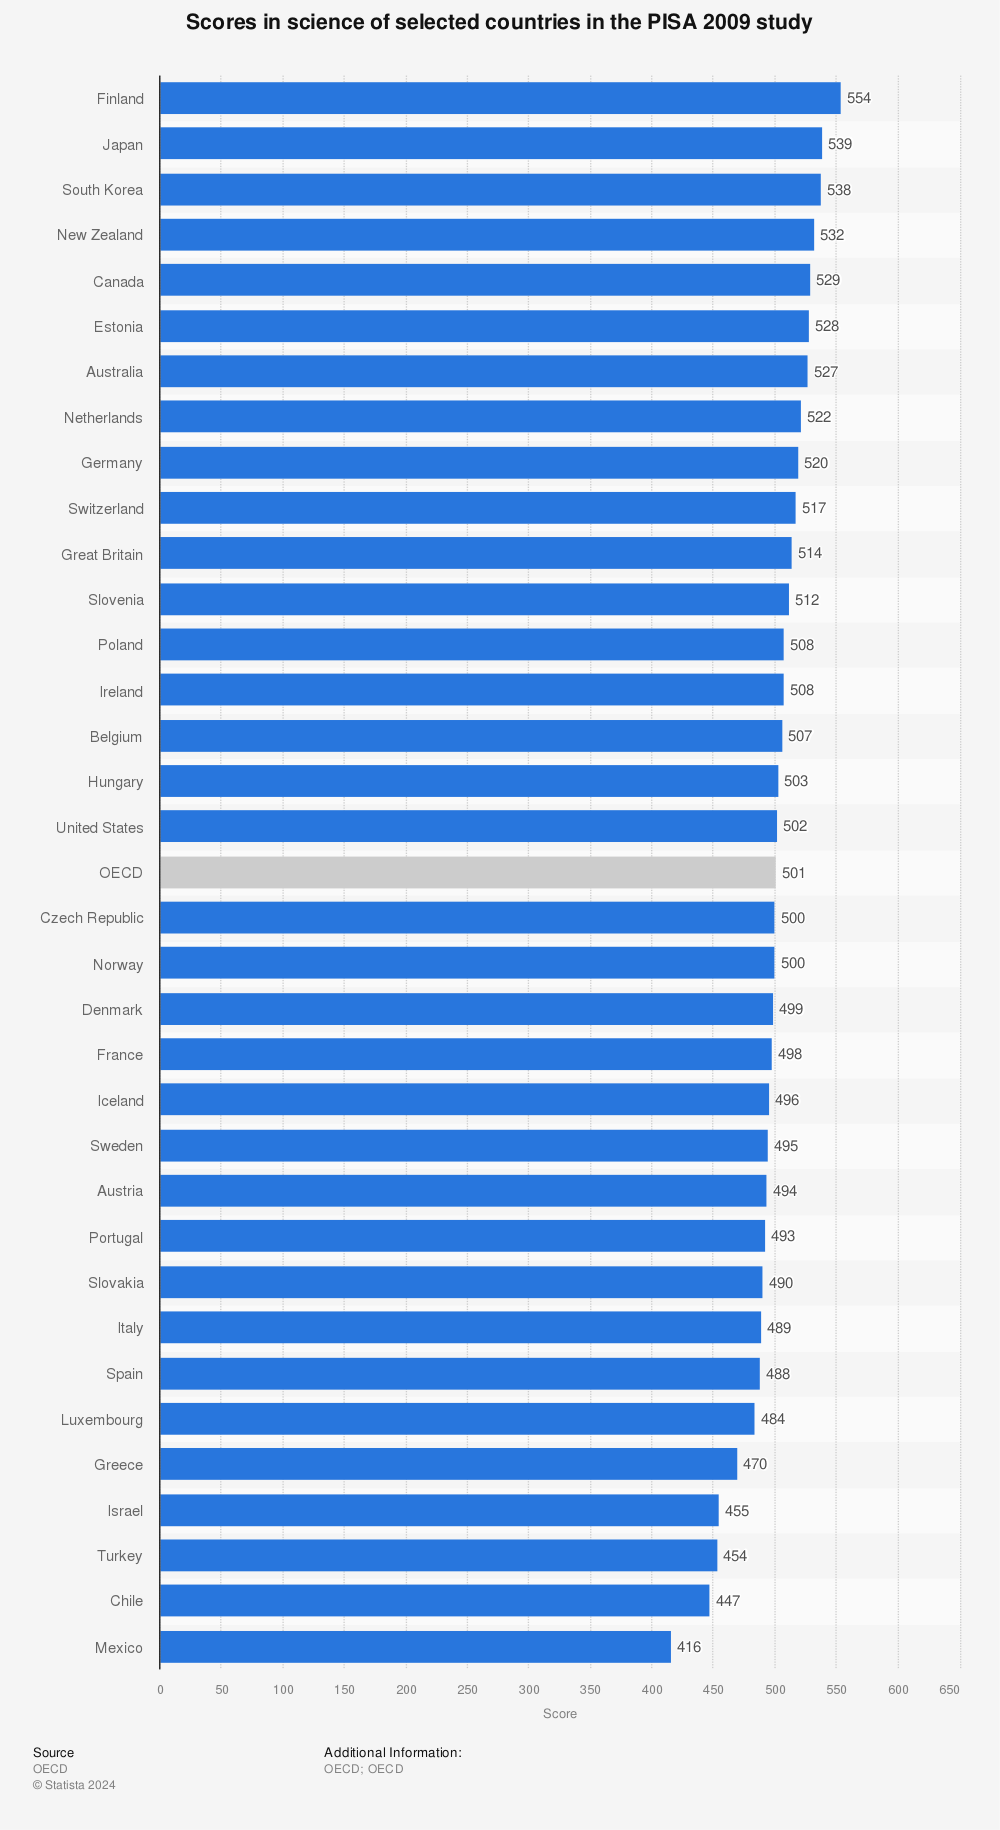 Statistic: Scores in science of selected countries in the PISA 2009 study | Statista